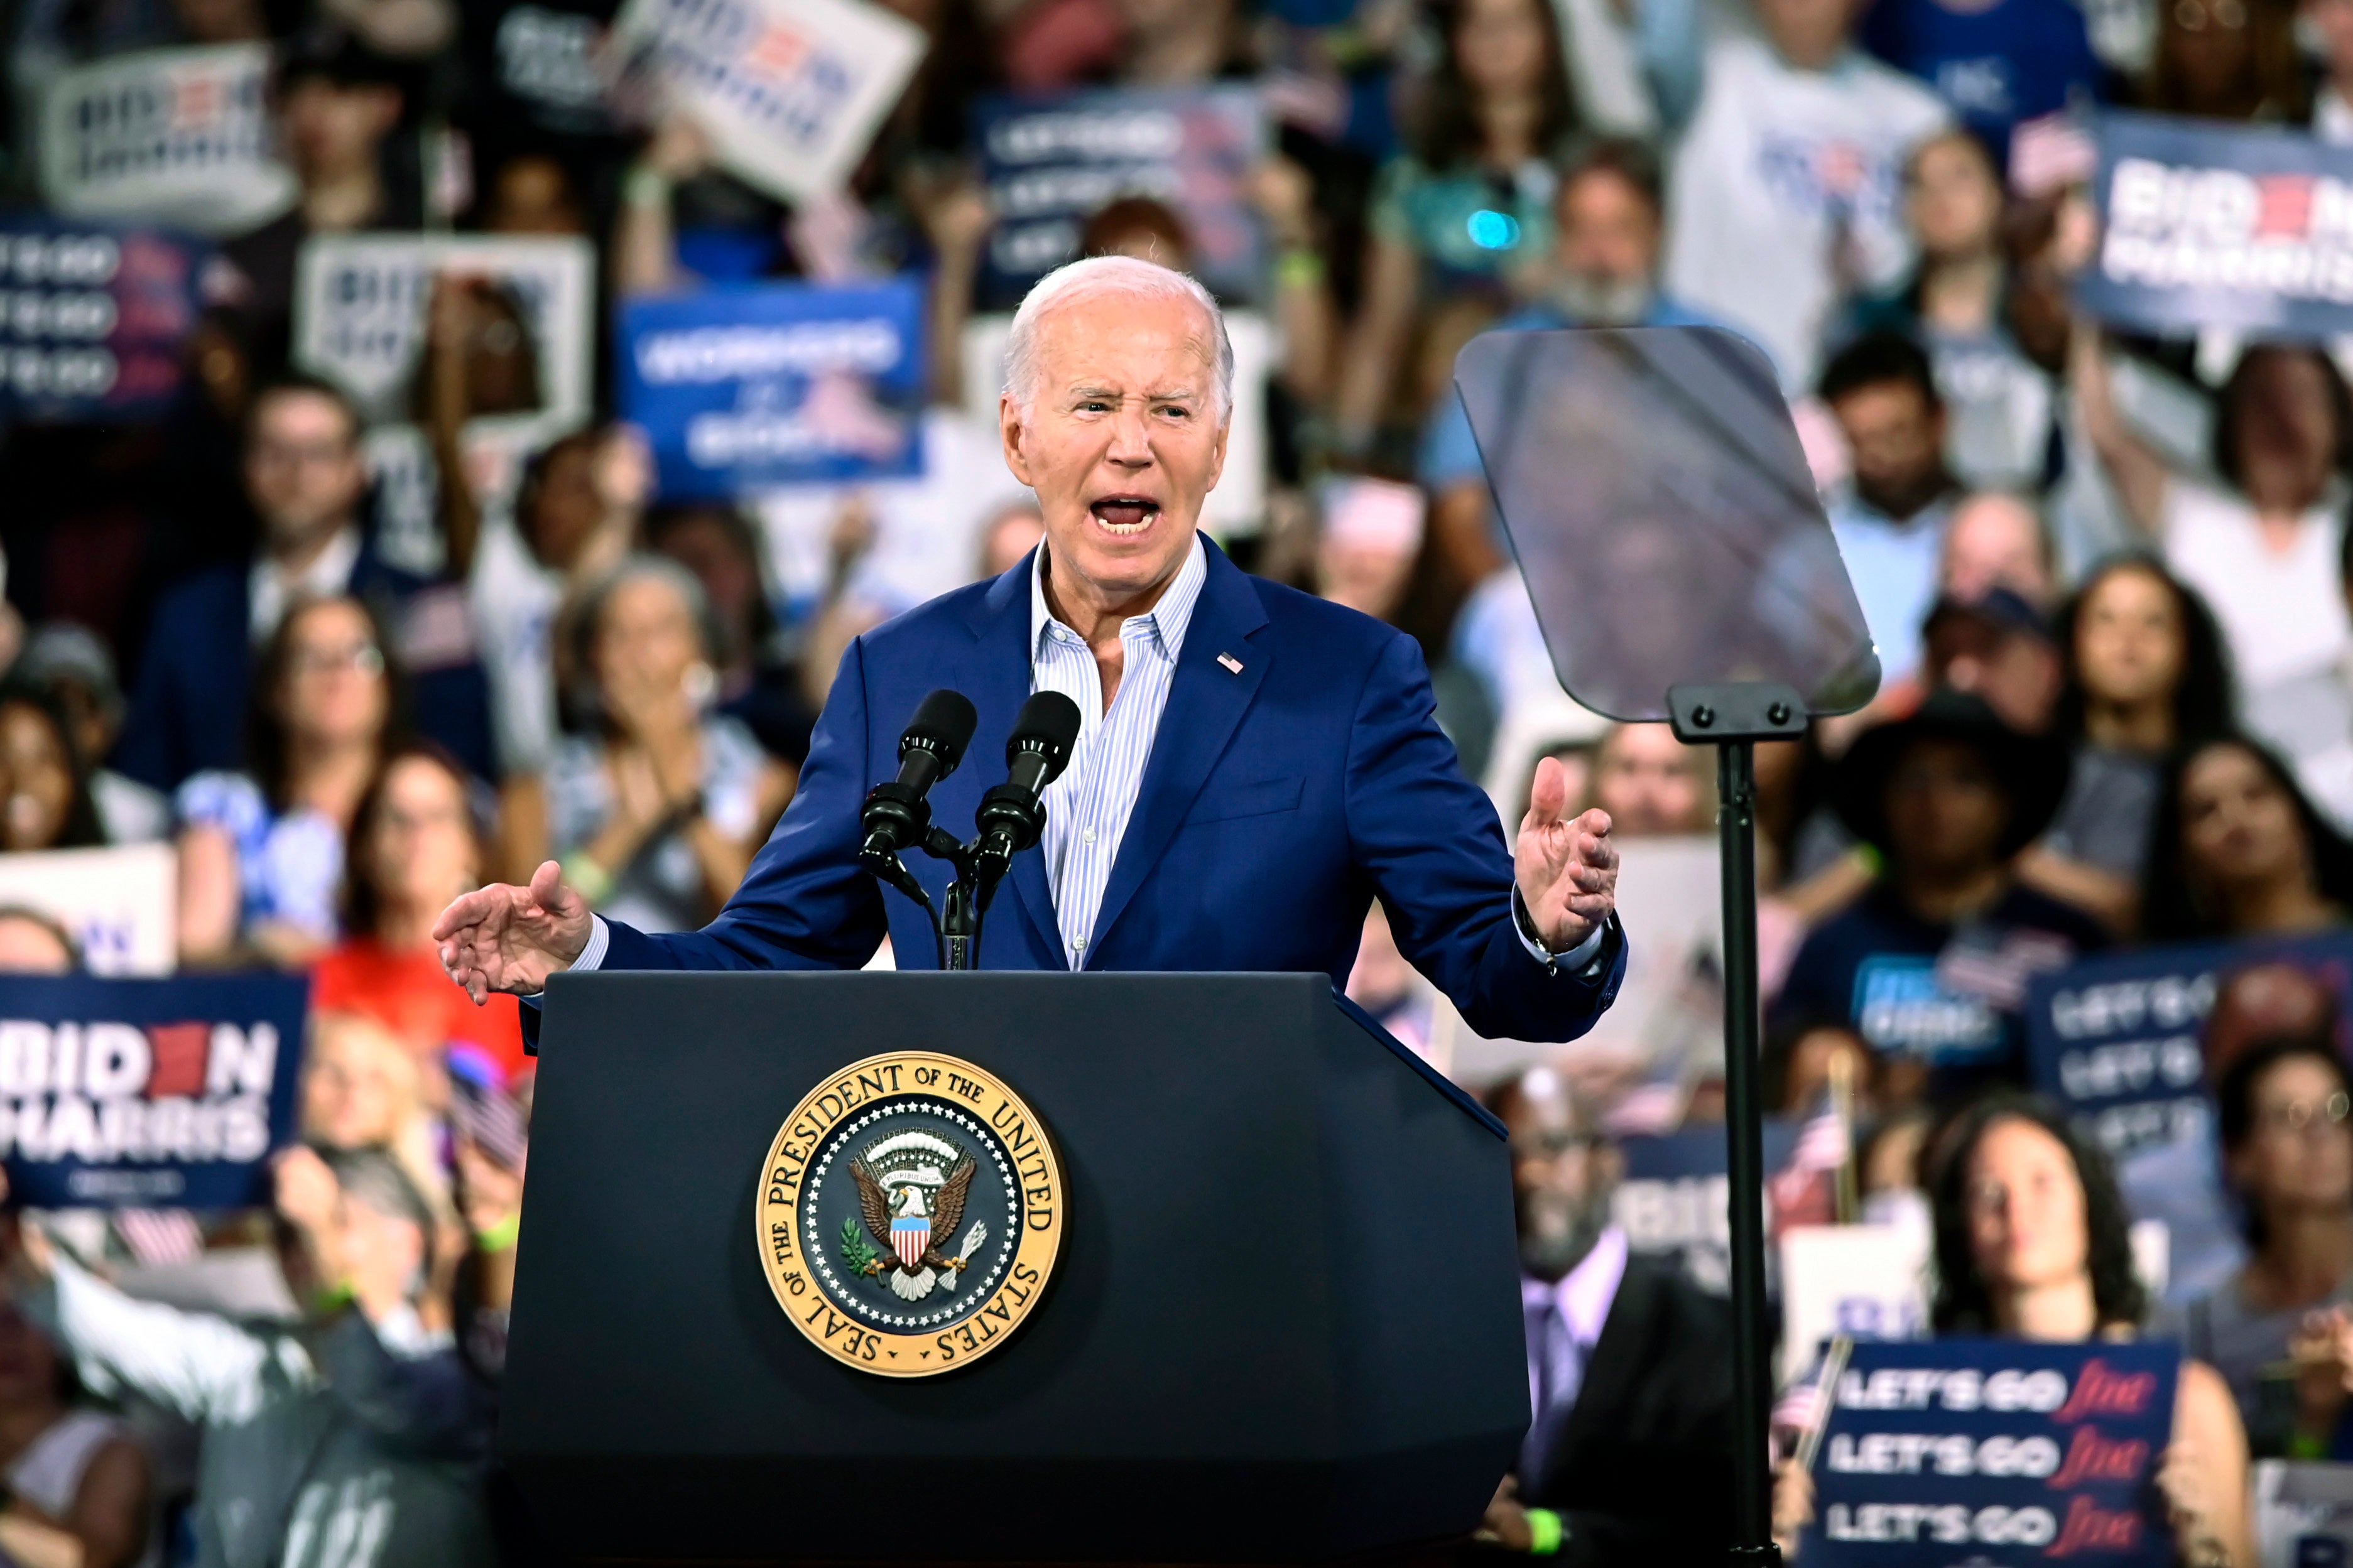 Joe Biden, pictured at a campaign event on June 28, addressed his poor debate performance